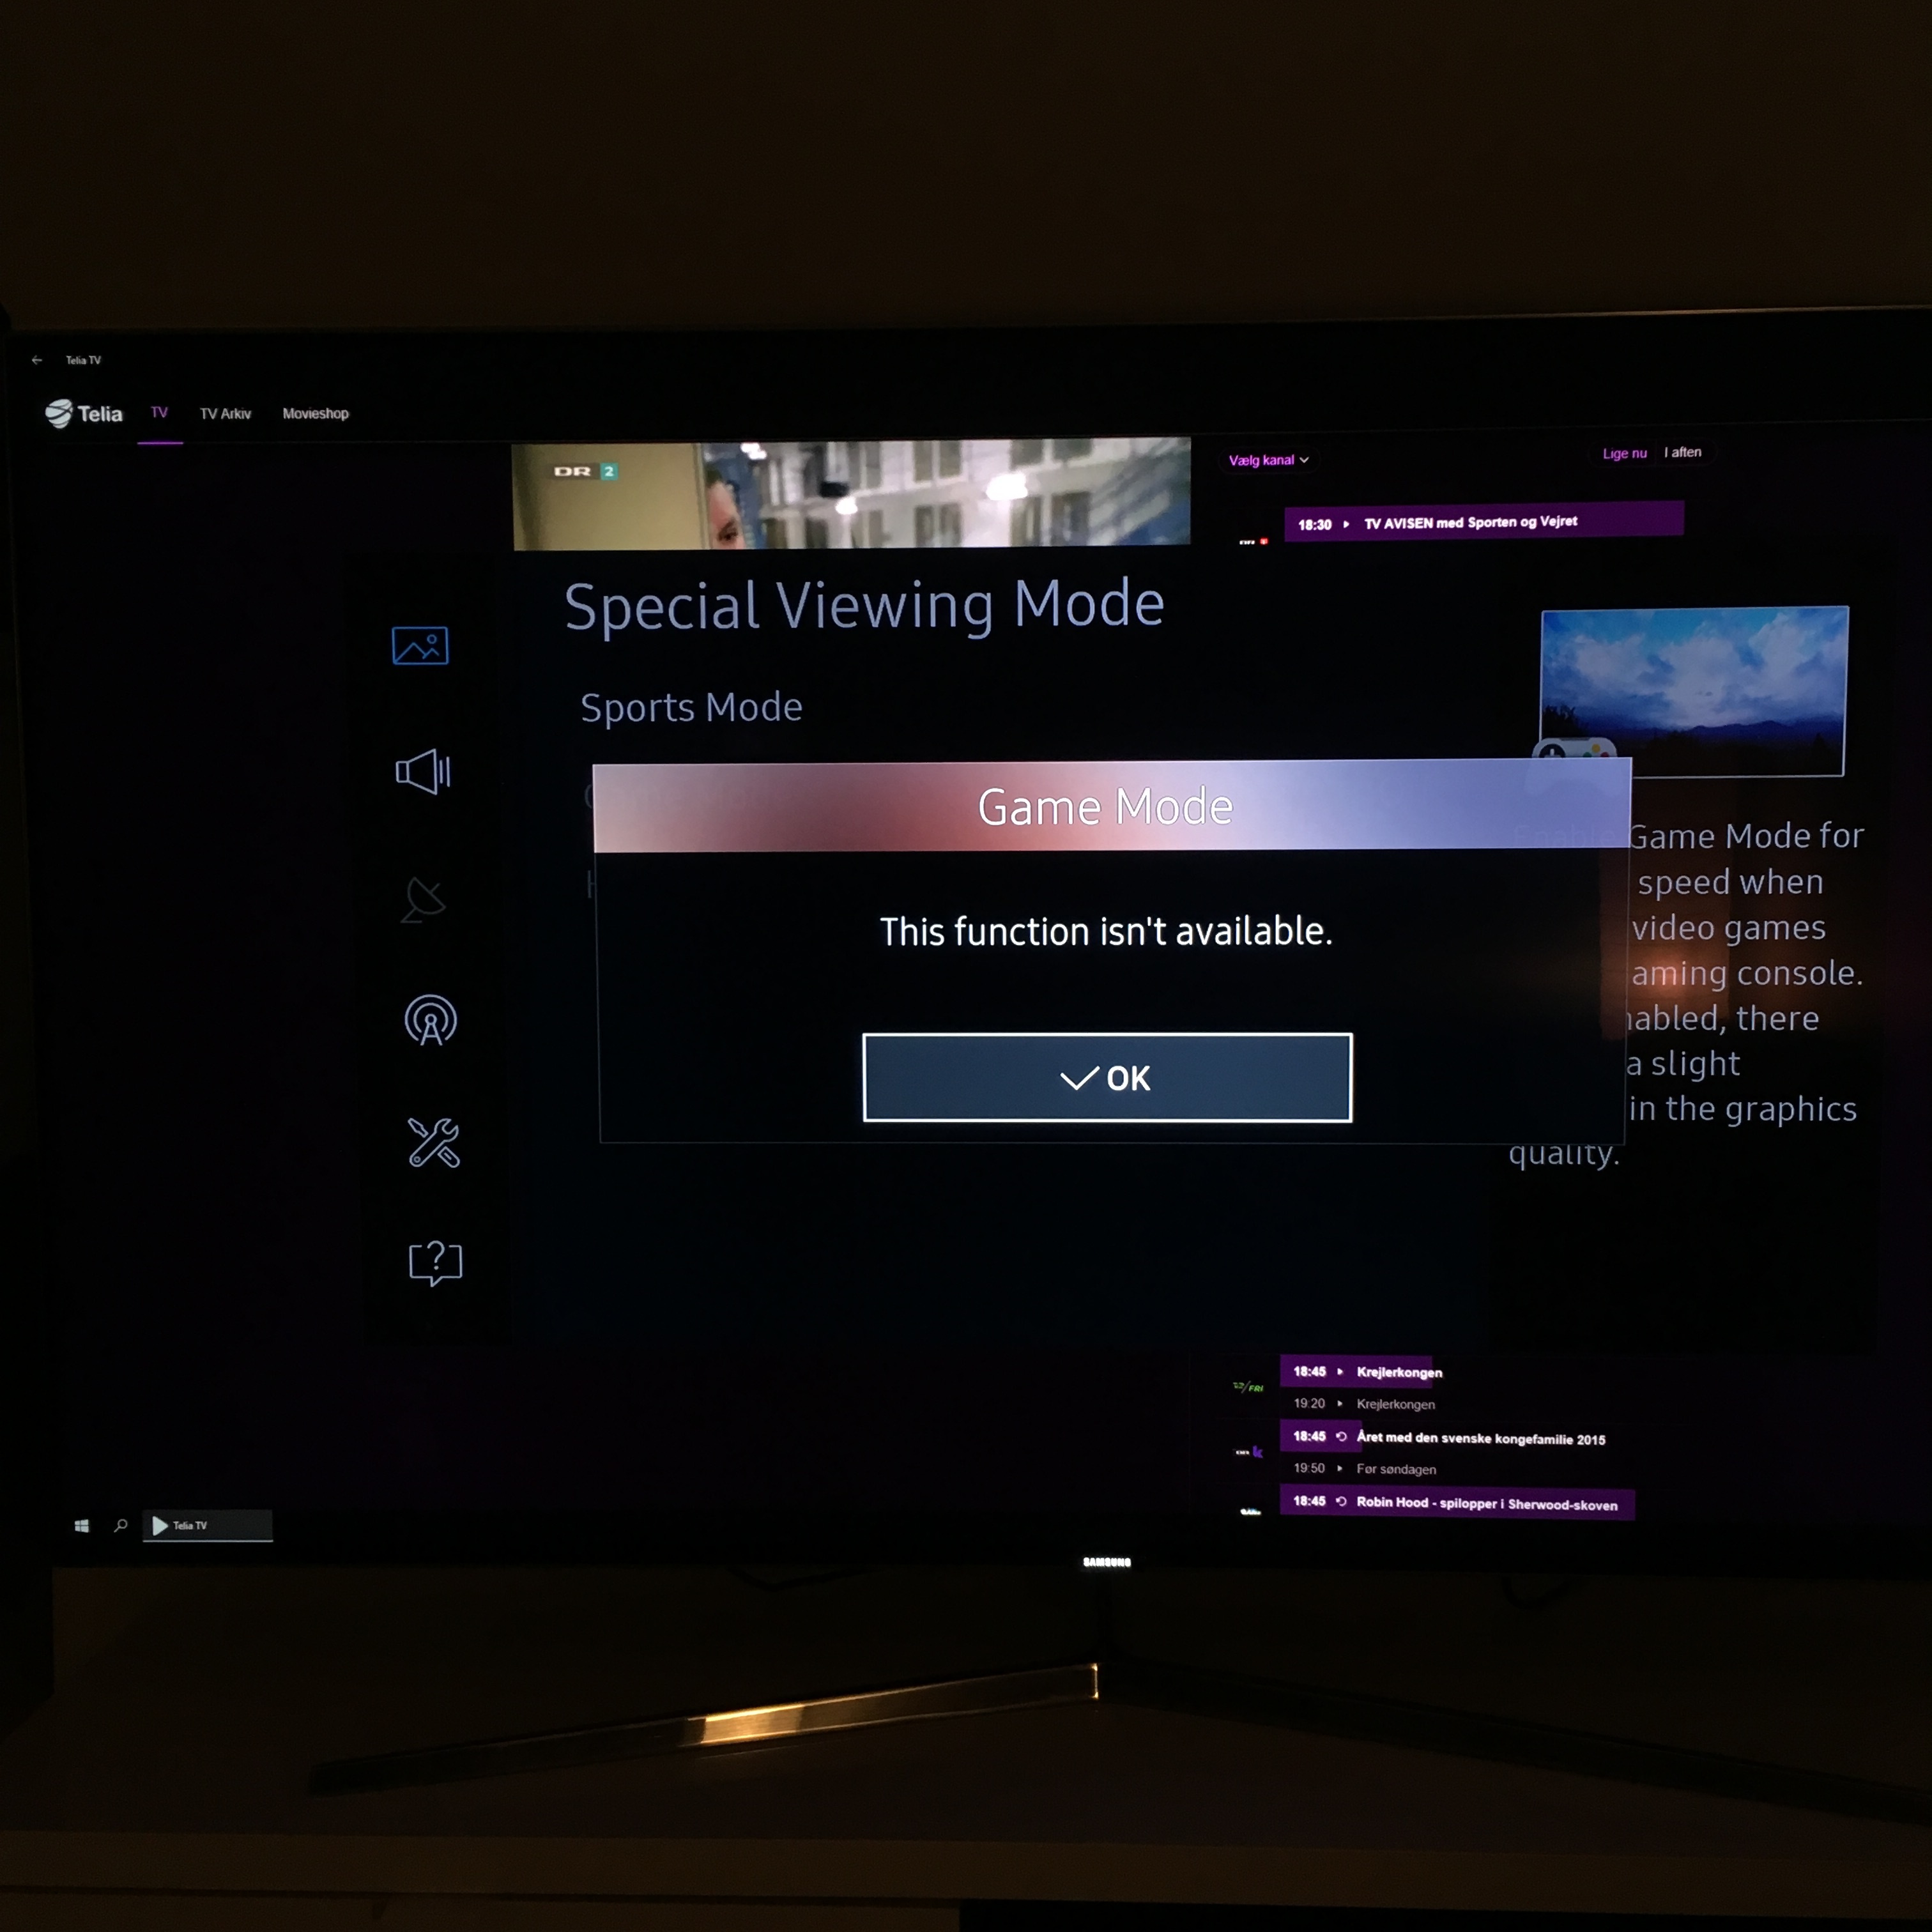 I can't turn on game-mode on new TV - Troubleshooting Linus Tech Tips